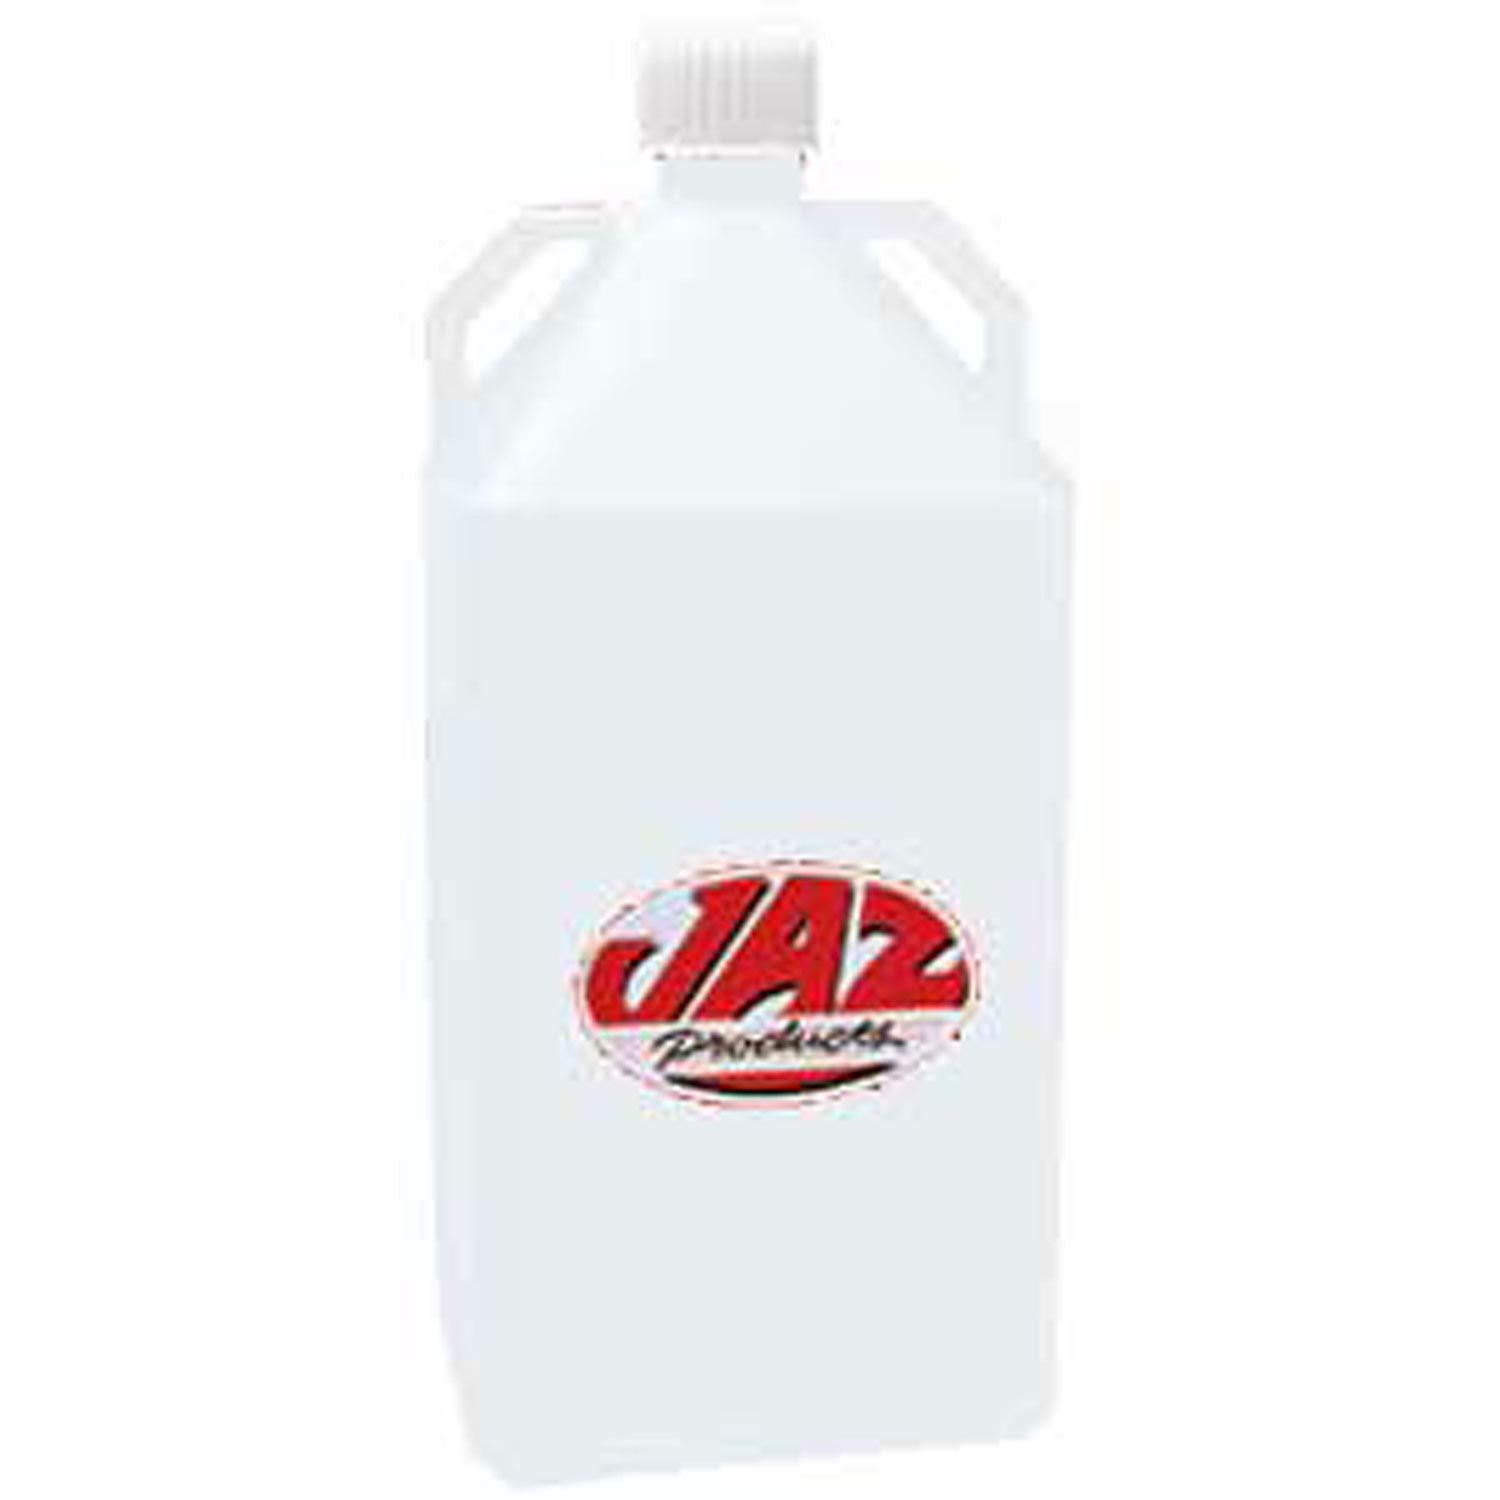 Jaz Products 710-015-05 - Utility Jug, 15 gal, 13 x 13 x 30 in Tall, O-Ring Seal Cap, Square, Plastic, Natural, Each